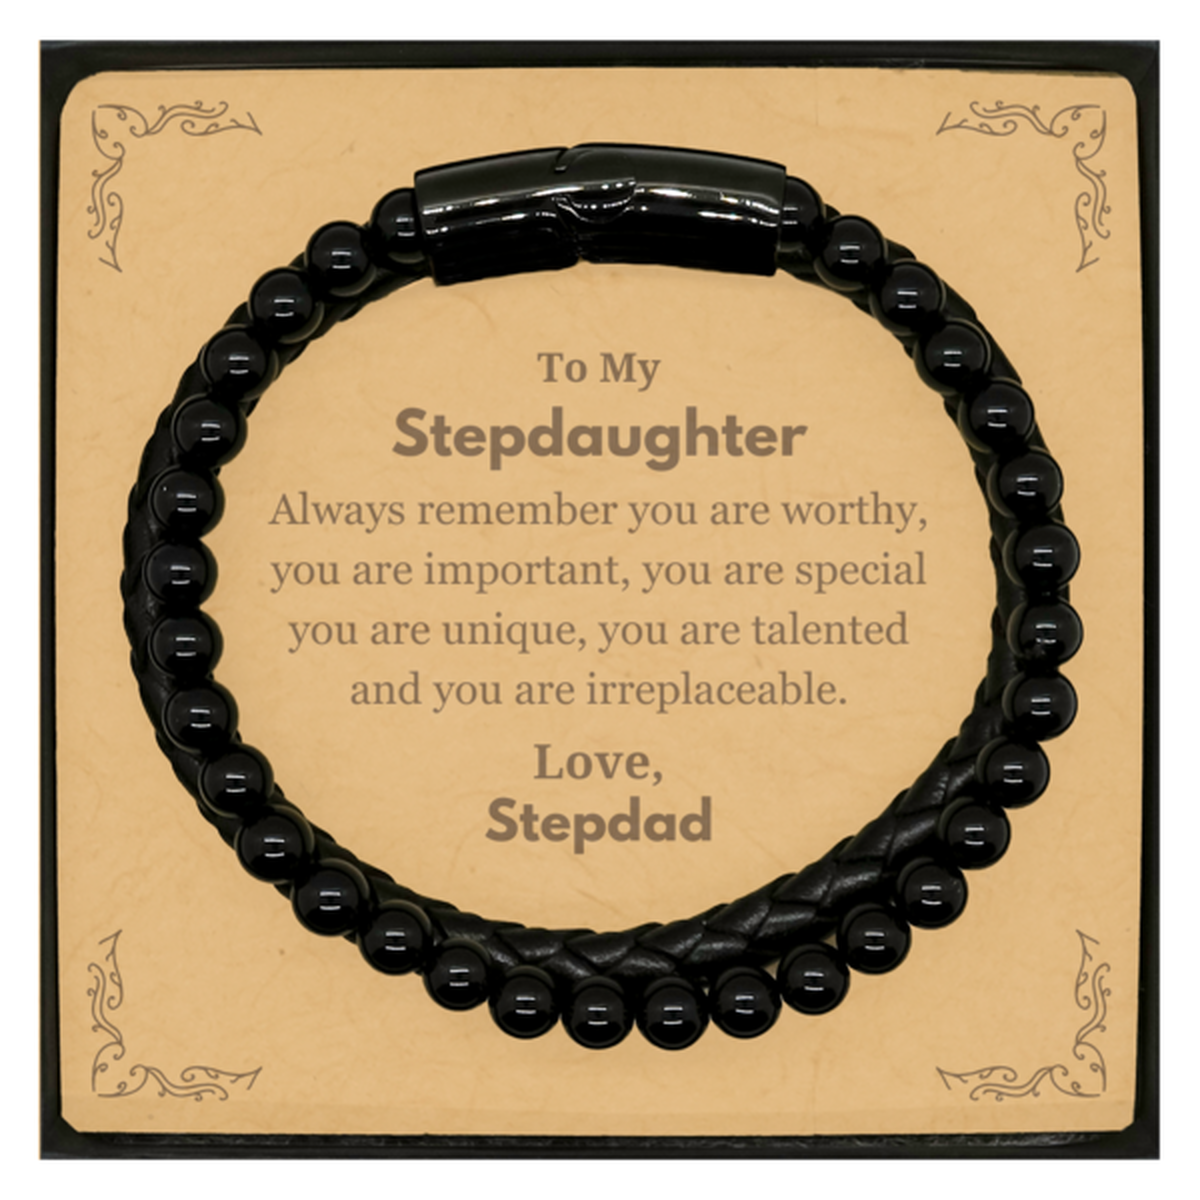 Stepdaughter Birthday Gifts from Stepdad, Inspirational Stone Leather Bracelets for Stepdaughter Christmas Graduation Gifts for Stepdaughter Always remember you are worthy, you are important. Love, Stepdad